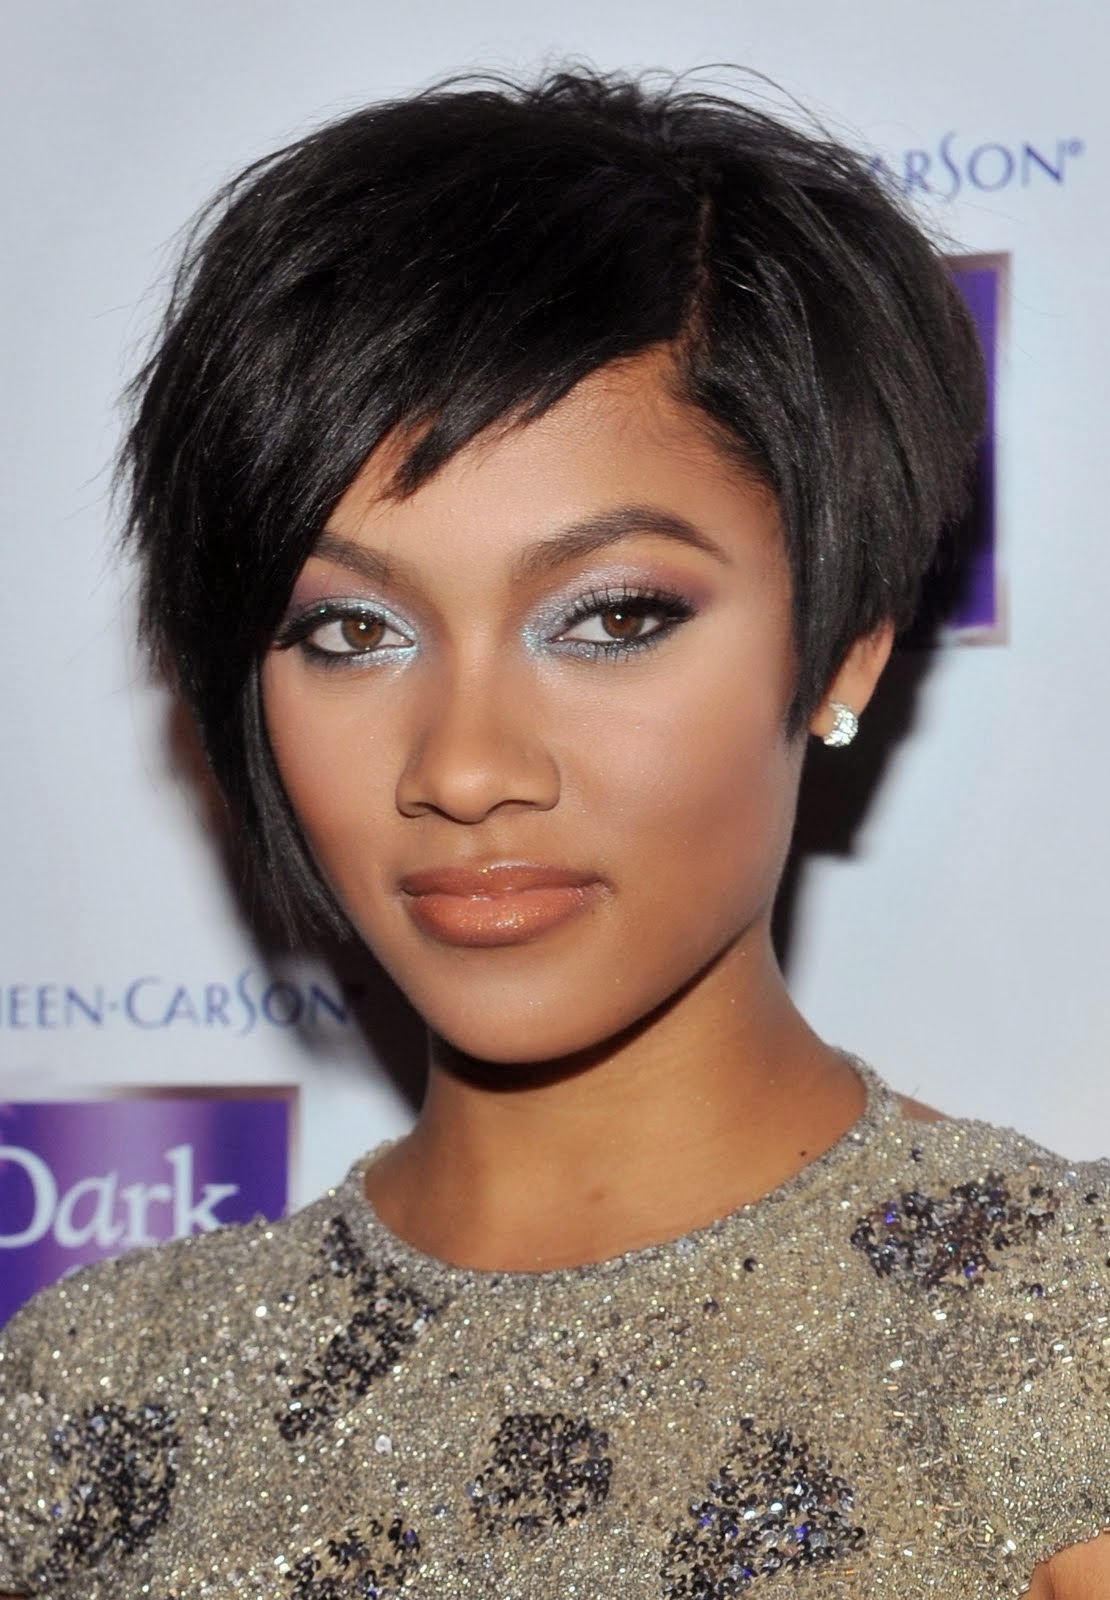 Wedding Hairstyles For Black Women 2013 Hairstyles for Black Women With Short Hair